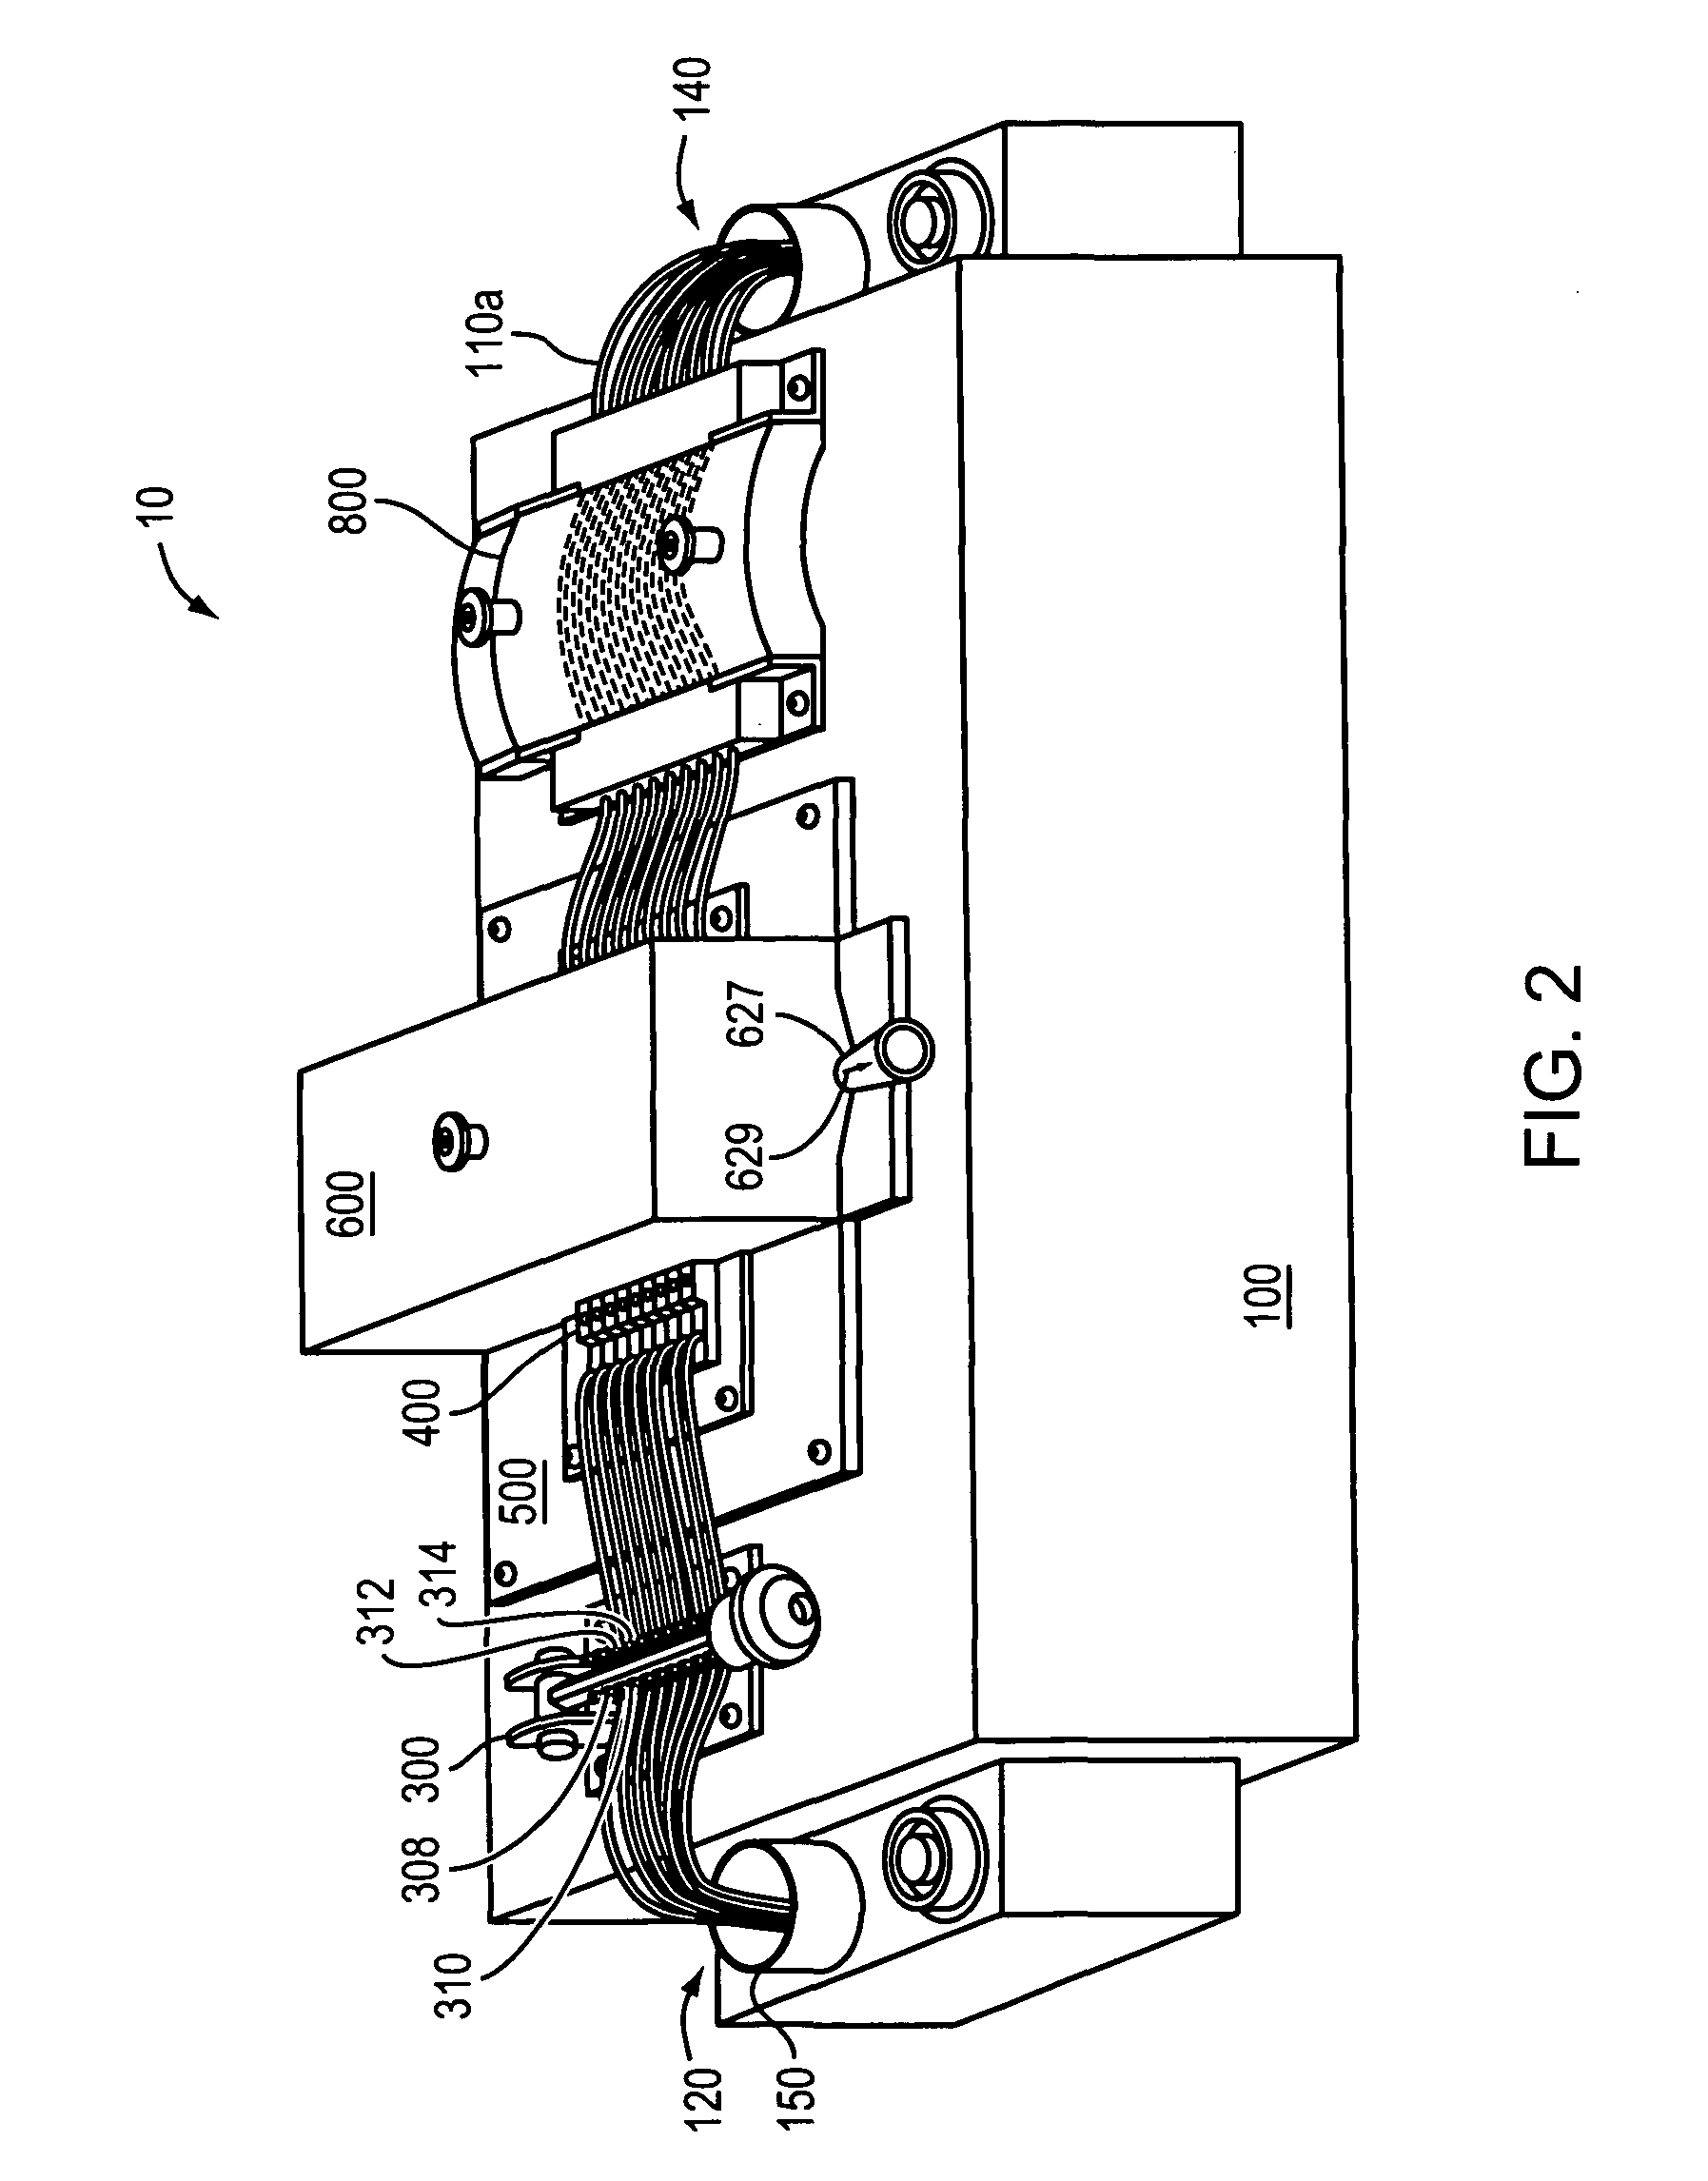 Apparatus for analyte processing